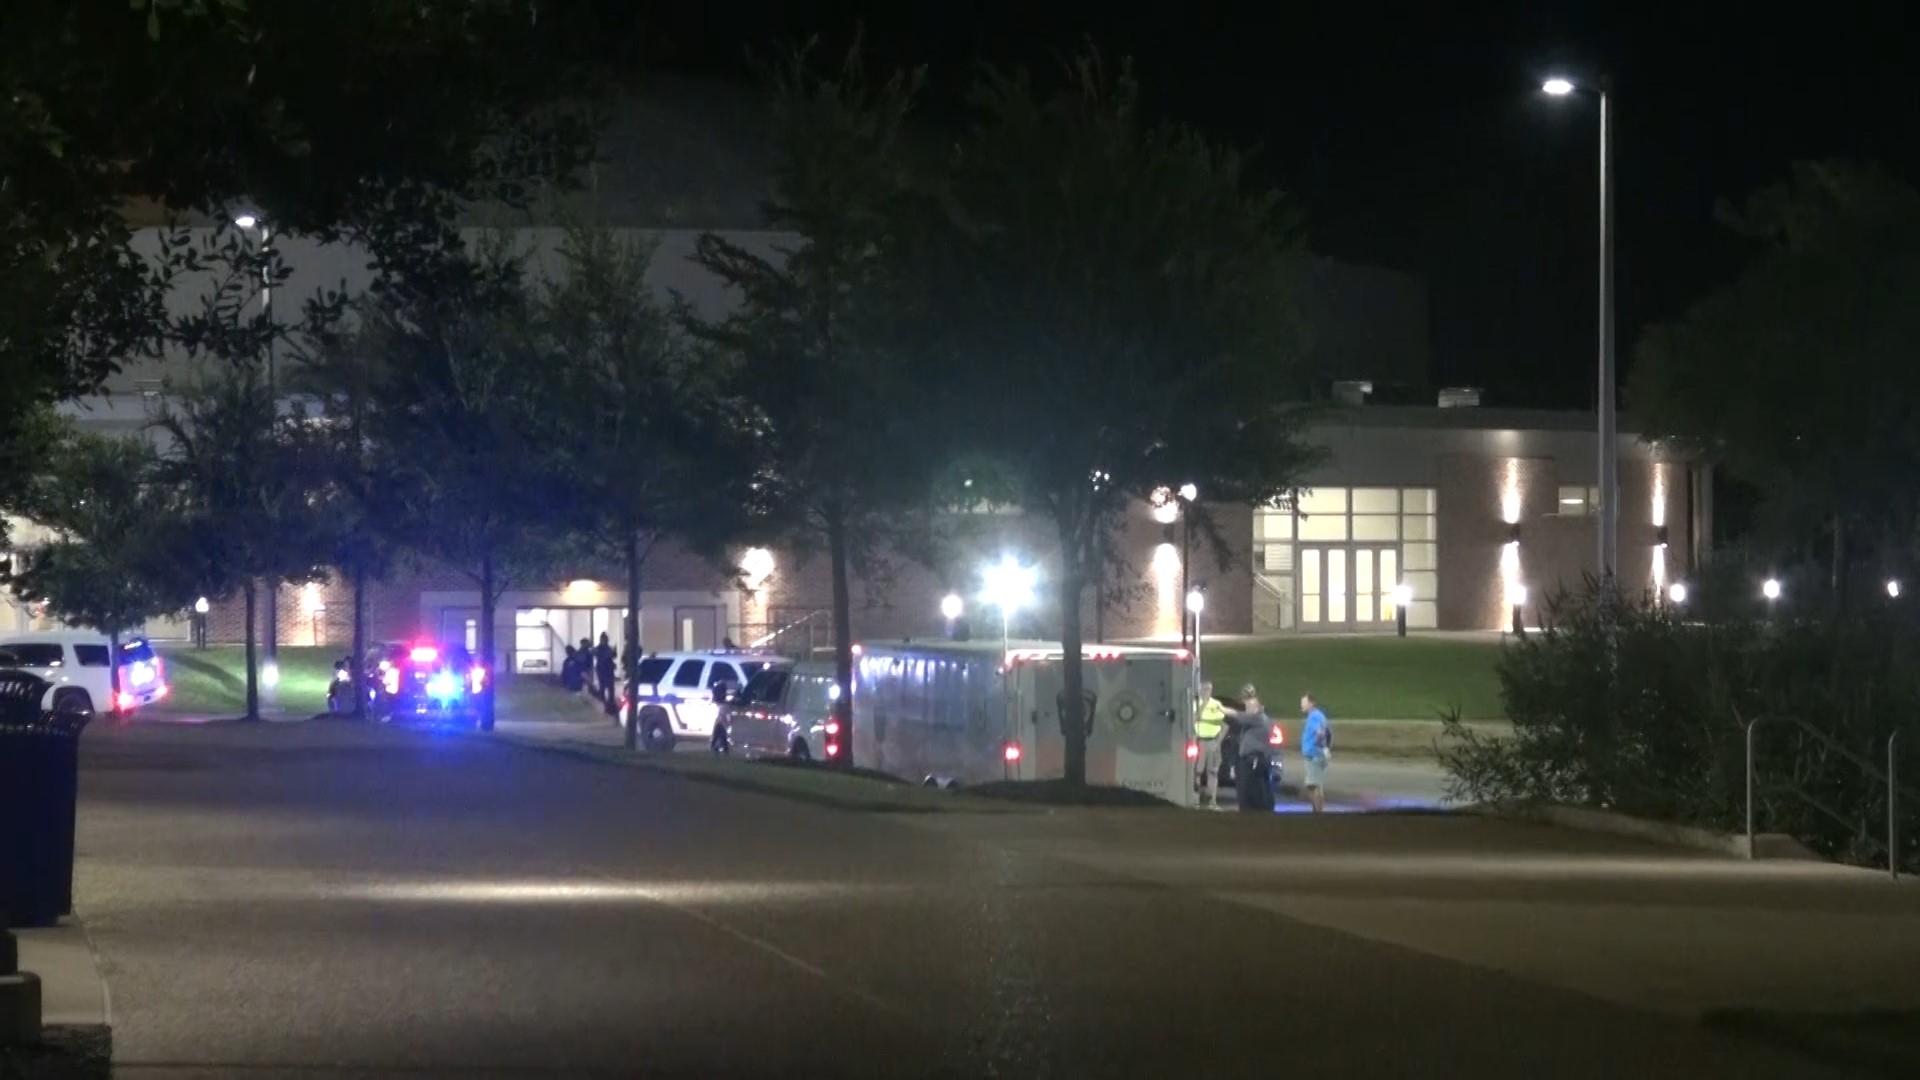 Students were treated in the "Baby Dome" after multiple first responders arrived on campus.